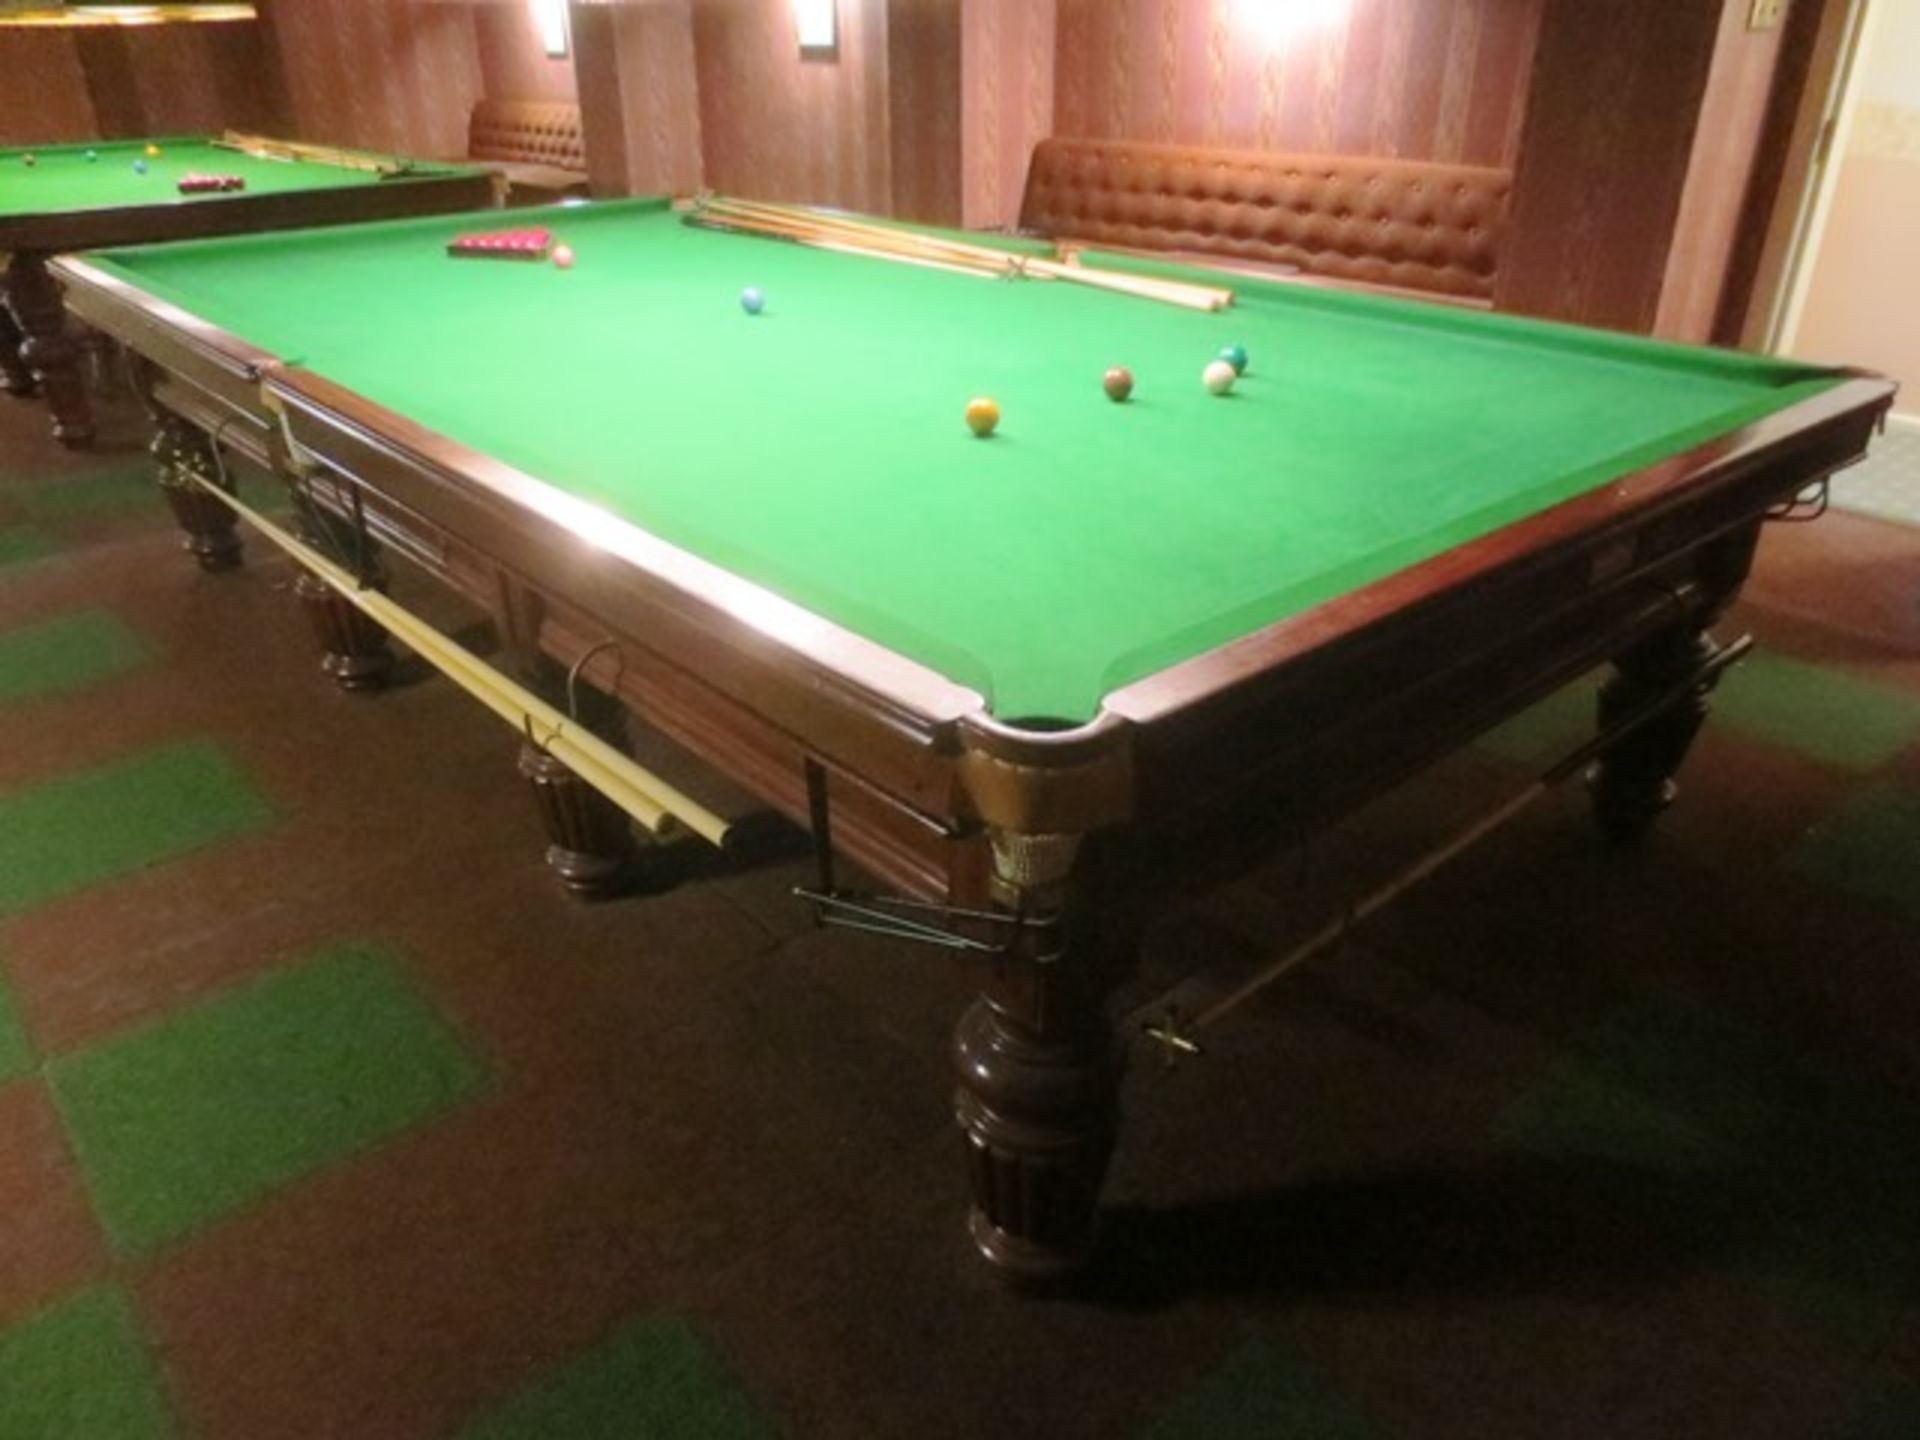 Riley Taskforce 1987 snooker table, with set of snooker balls (minus black ball), - Image 2 of 3